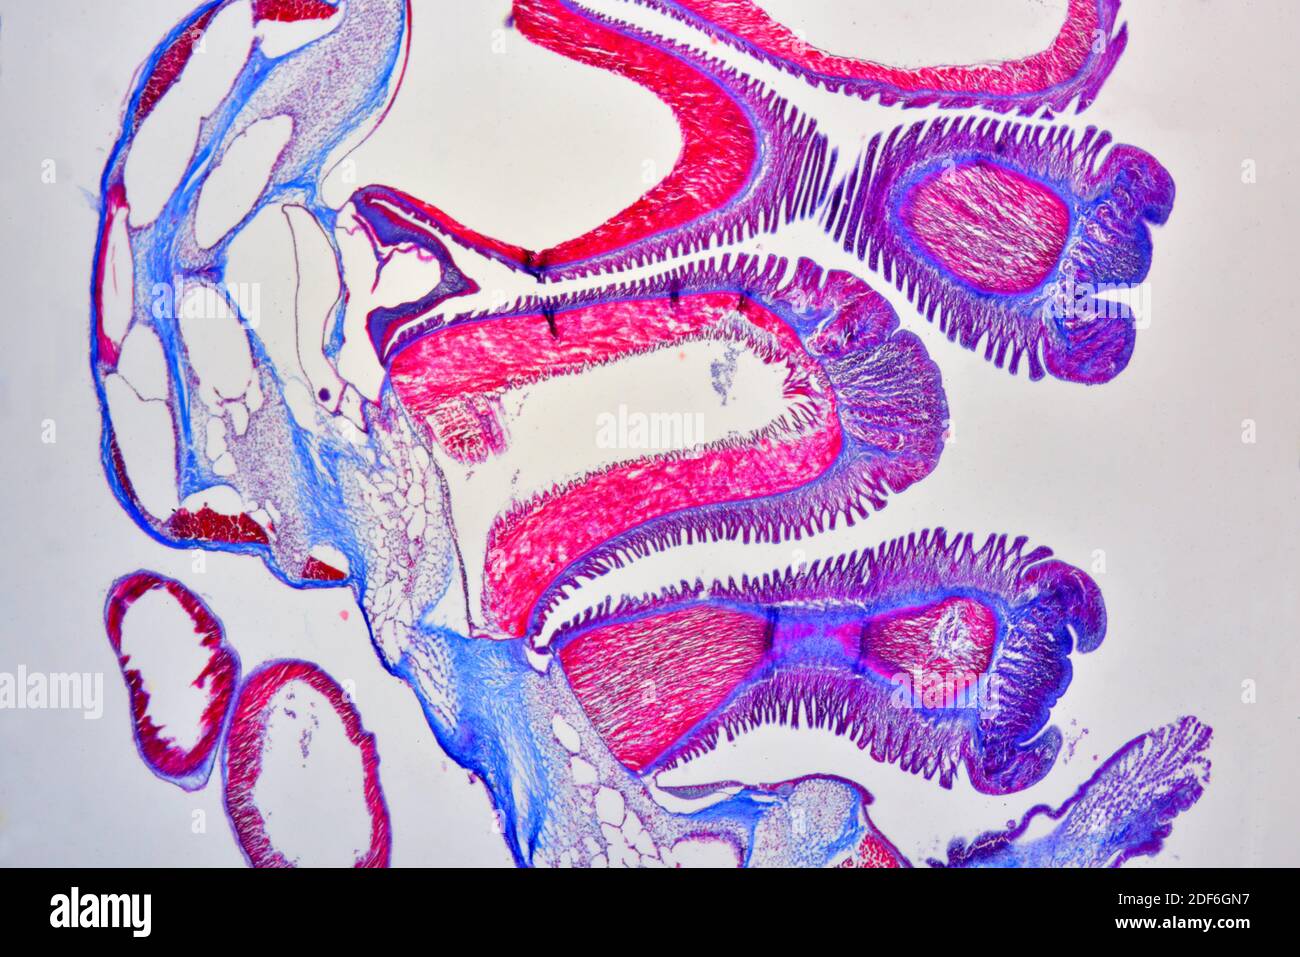 Asterias sp. cross section showing dermis, mucus glands, suckers and tube feets. Optical microscope X40. Stock Photo